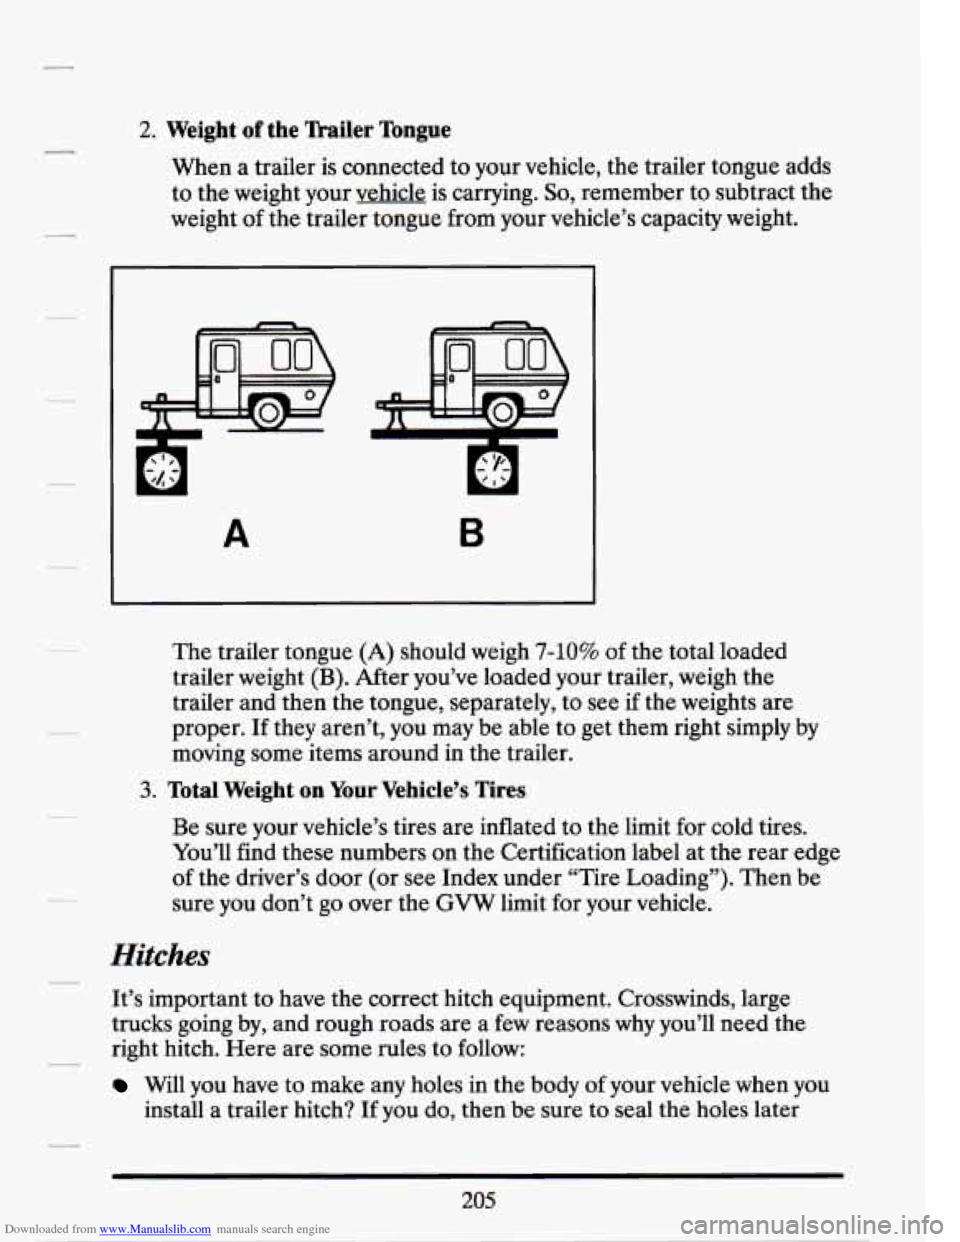 CADILLAC SEVILLE 1994 4.G Owners Manual Downloaded from www.Manualslib.com manuals search engine 2. Weight of the mailer  Tongue 
When a trailer  is connected  to your  vehicle,  the trailer  tongue  adds 
to  the  weight  your  vehicle  is